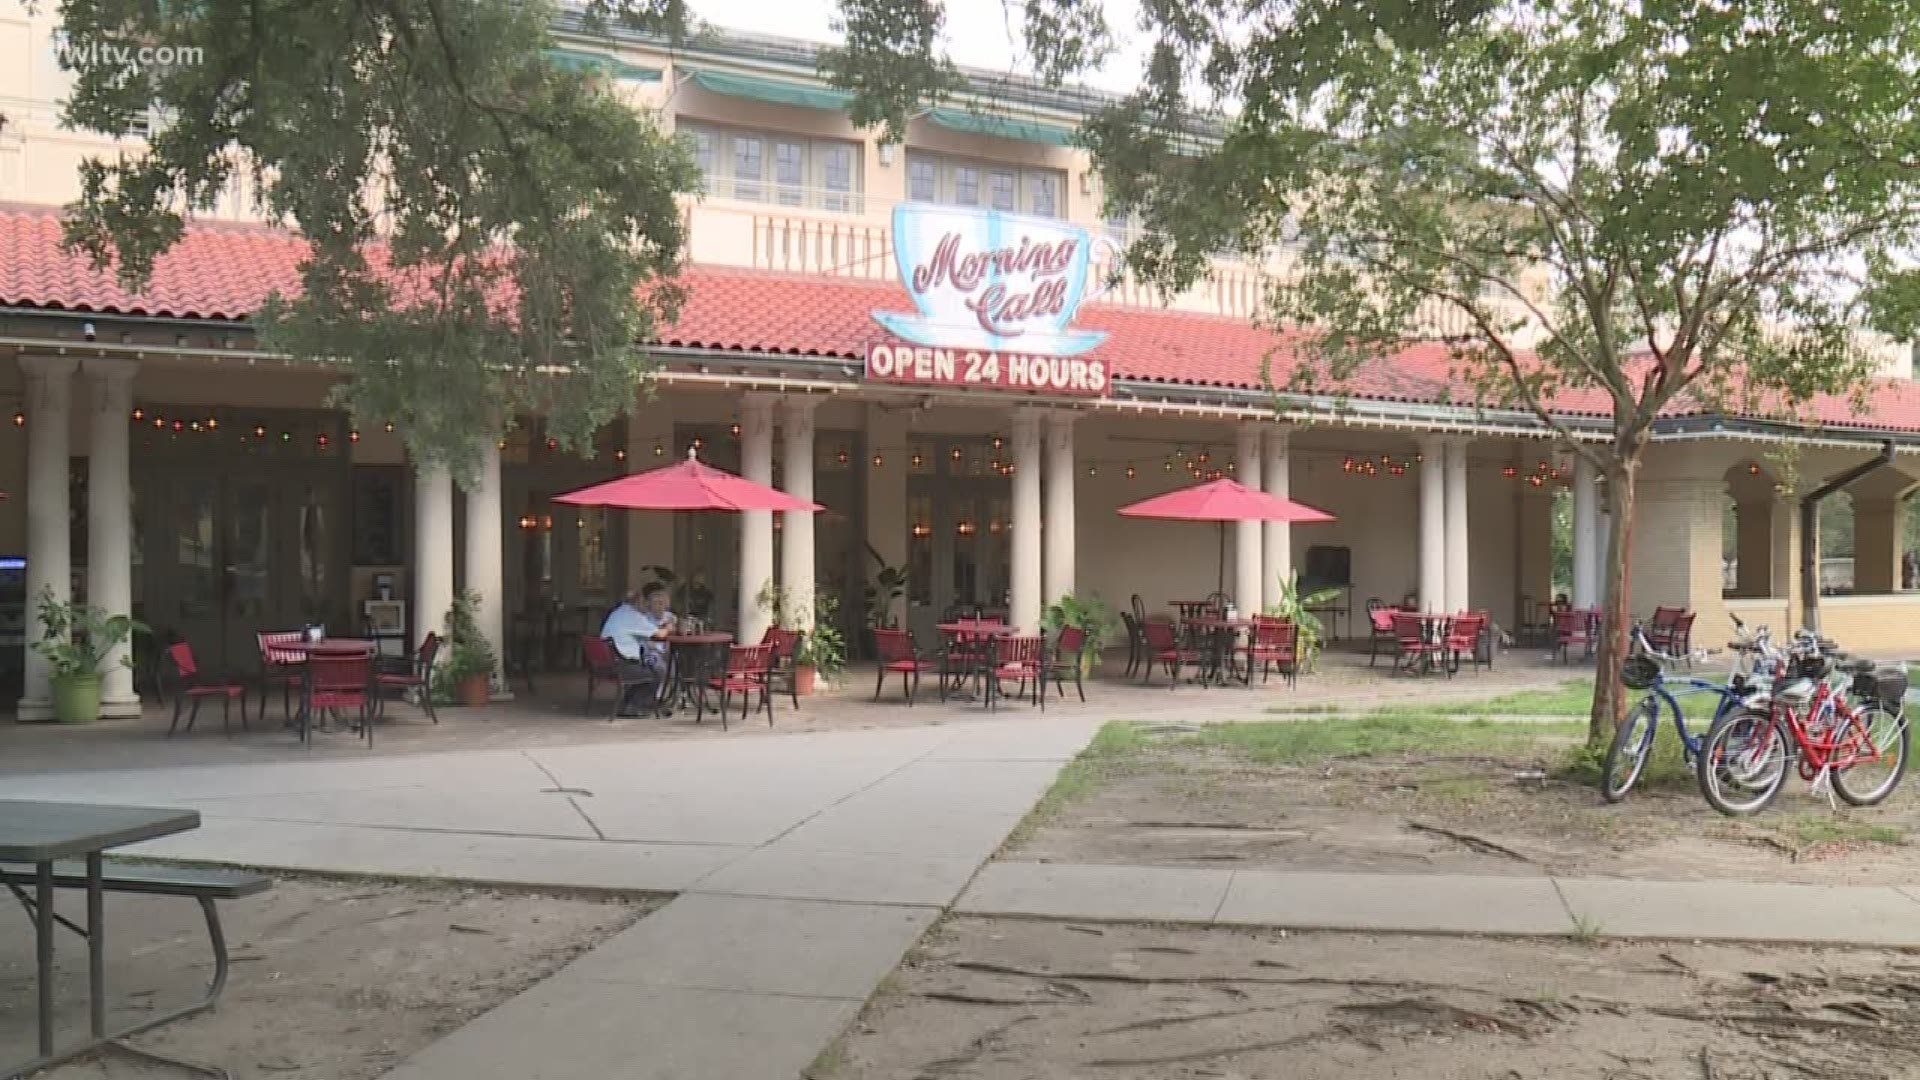 It appears Morning Call will have to leave its City Park location